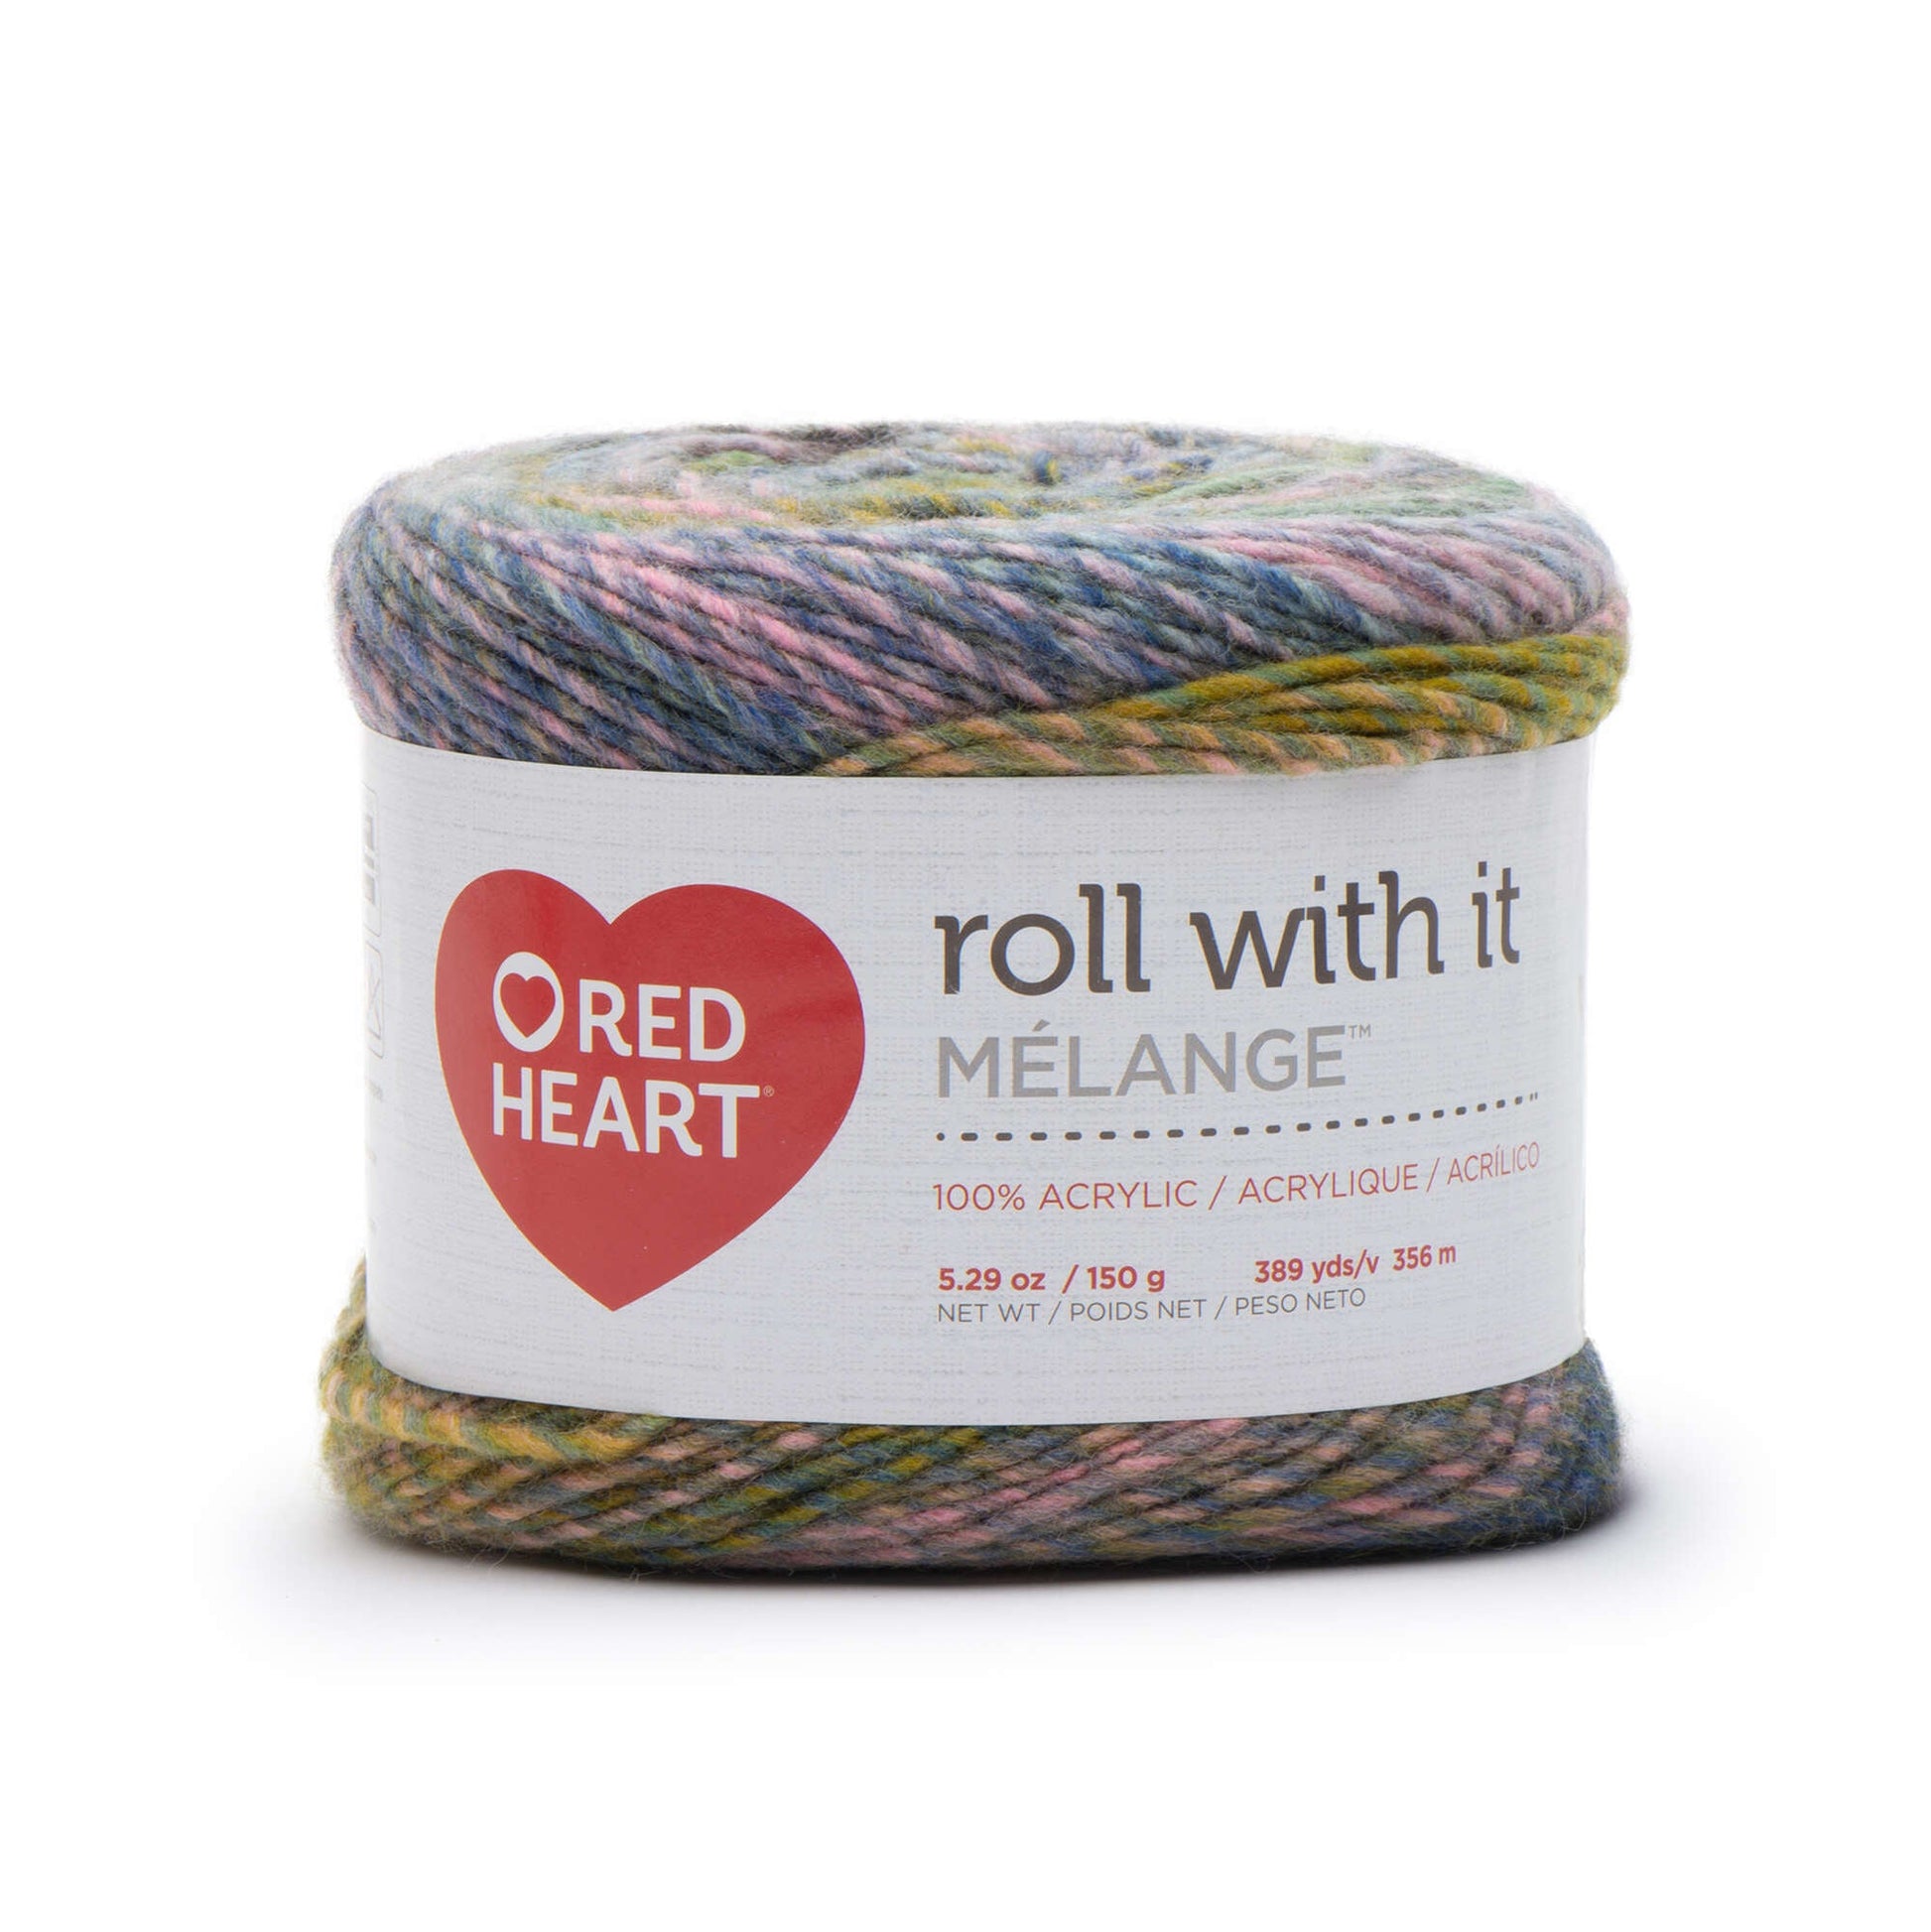 Red Heart Roll With It Melange Yarn - Discontinued shades